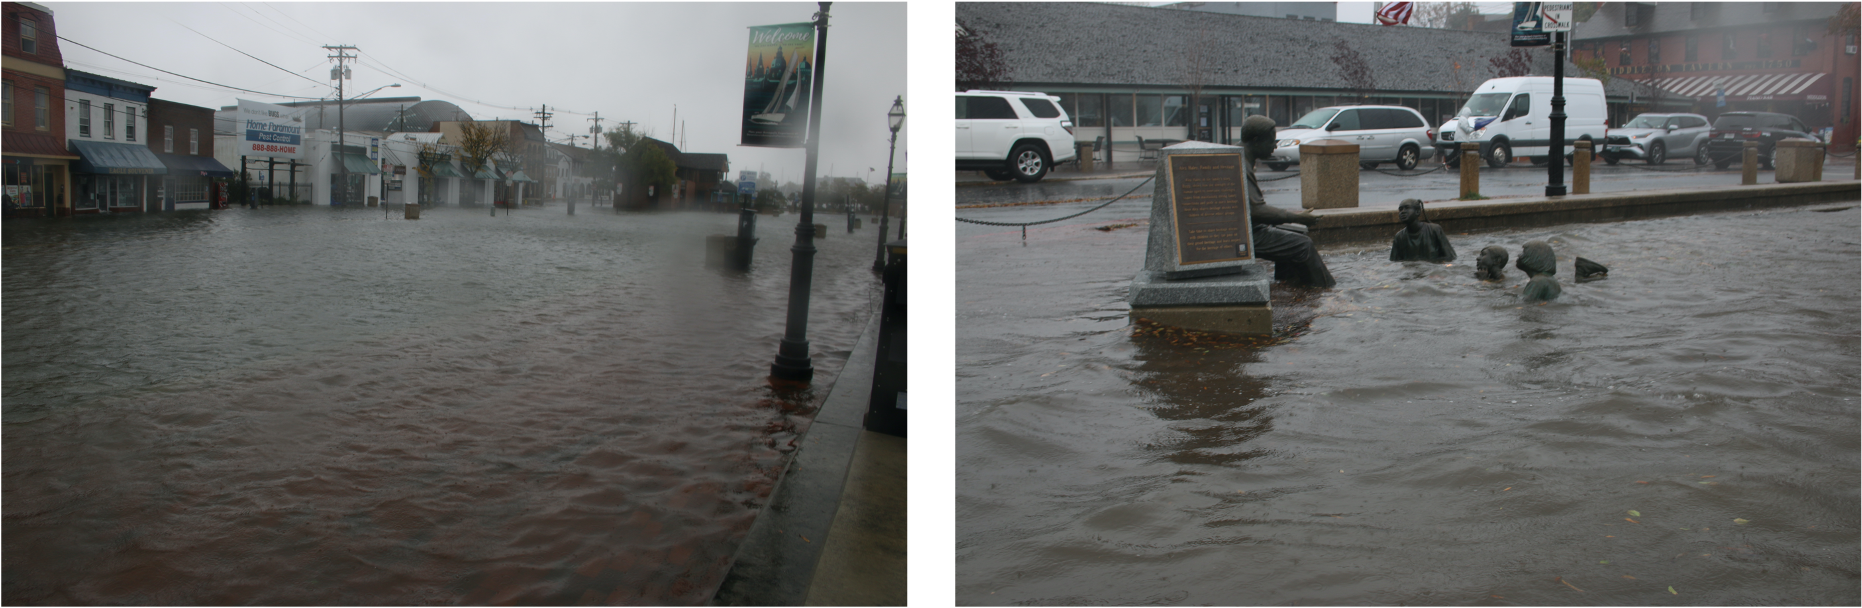 Photo one is an Annapolis street is covered with a couple inches of standing floodwater, and photo two is the Annapolis floodwater has partially submerged the Kunta Kinte-Alex Haley Memorial statues.